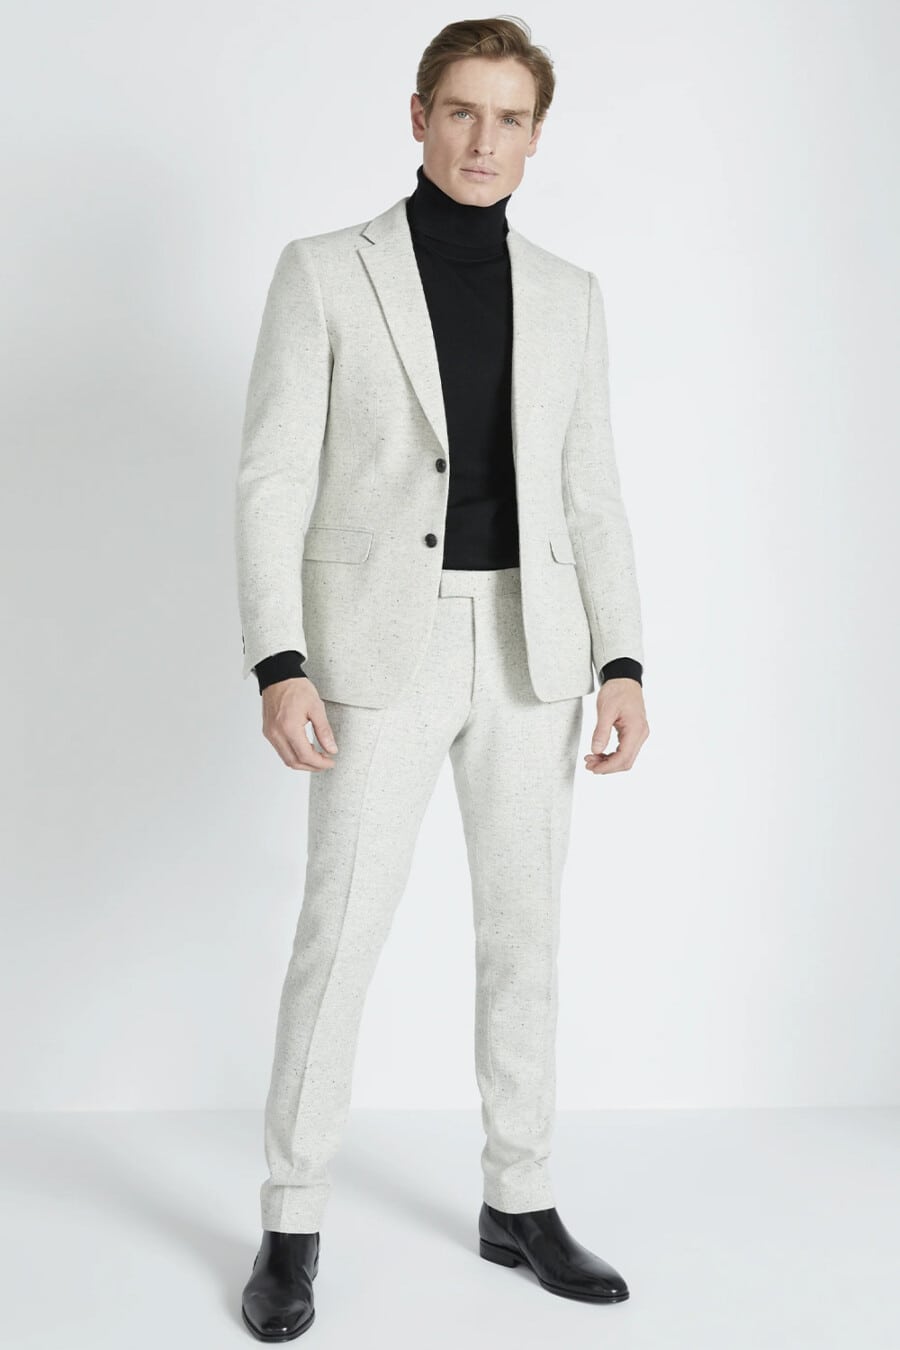 Men's light stone flecked suit, black turtleneck and black leather Chelsea boots outfit